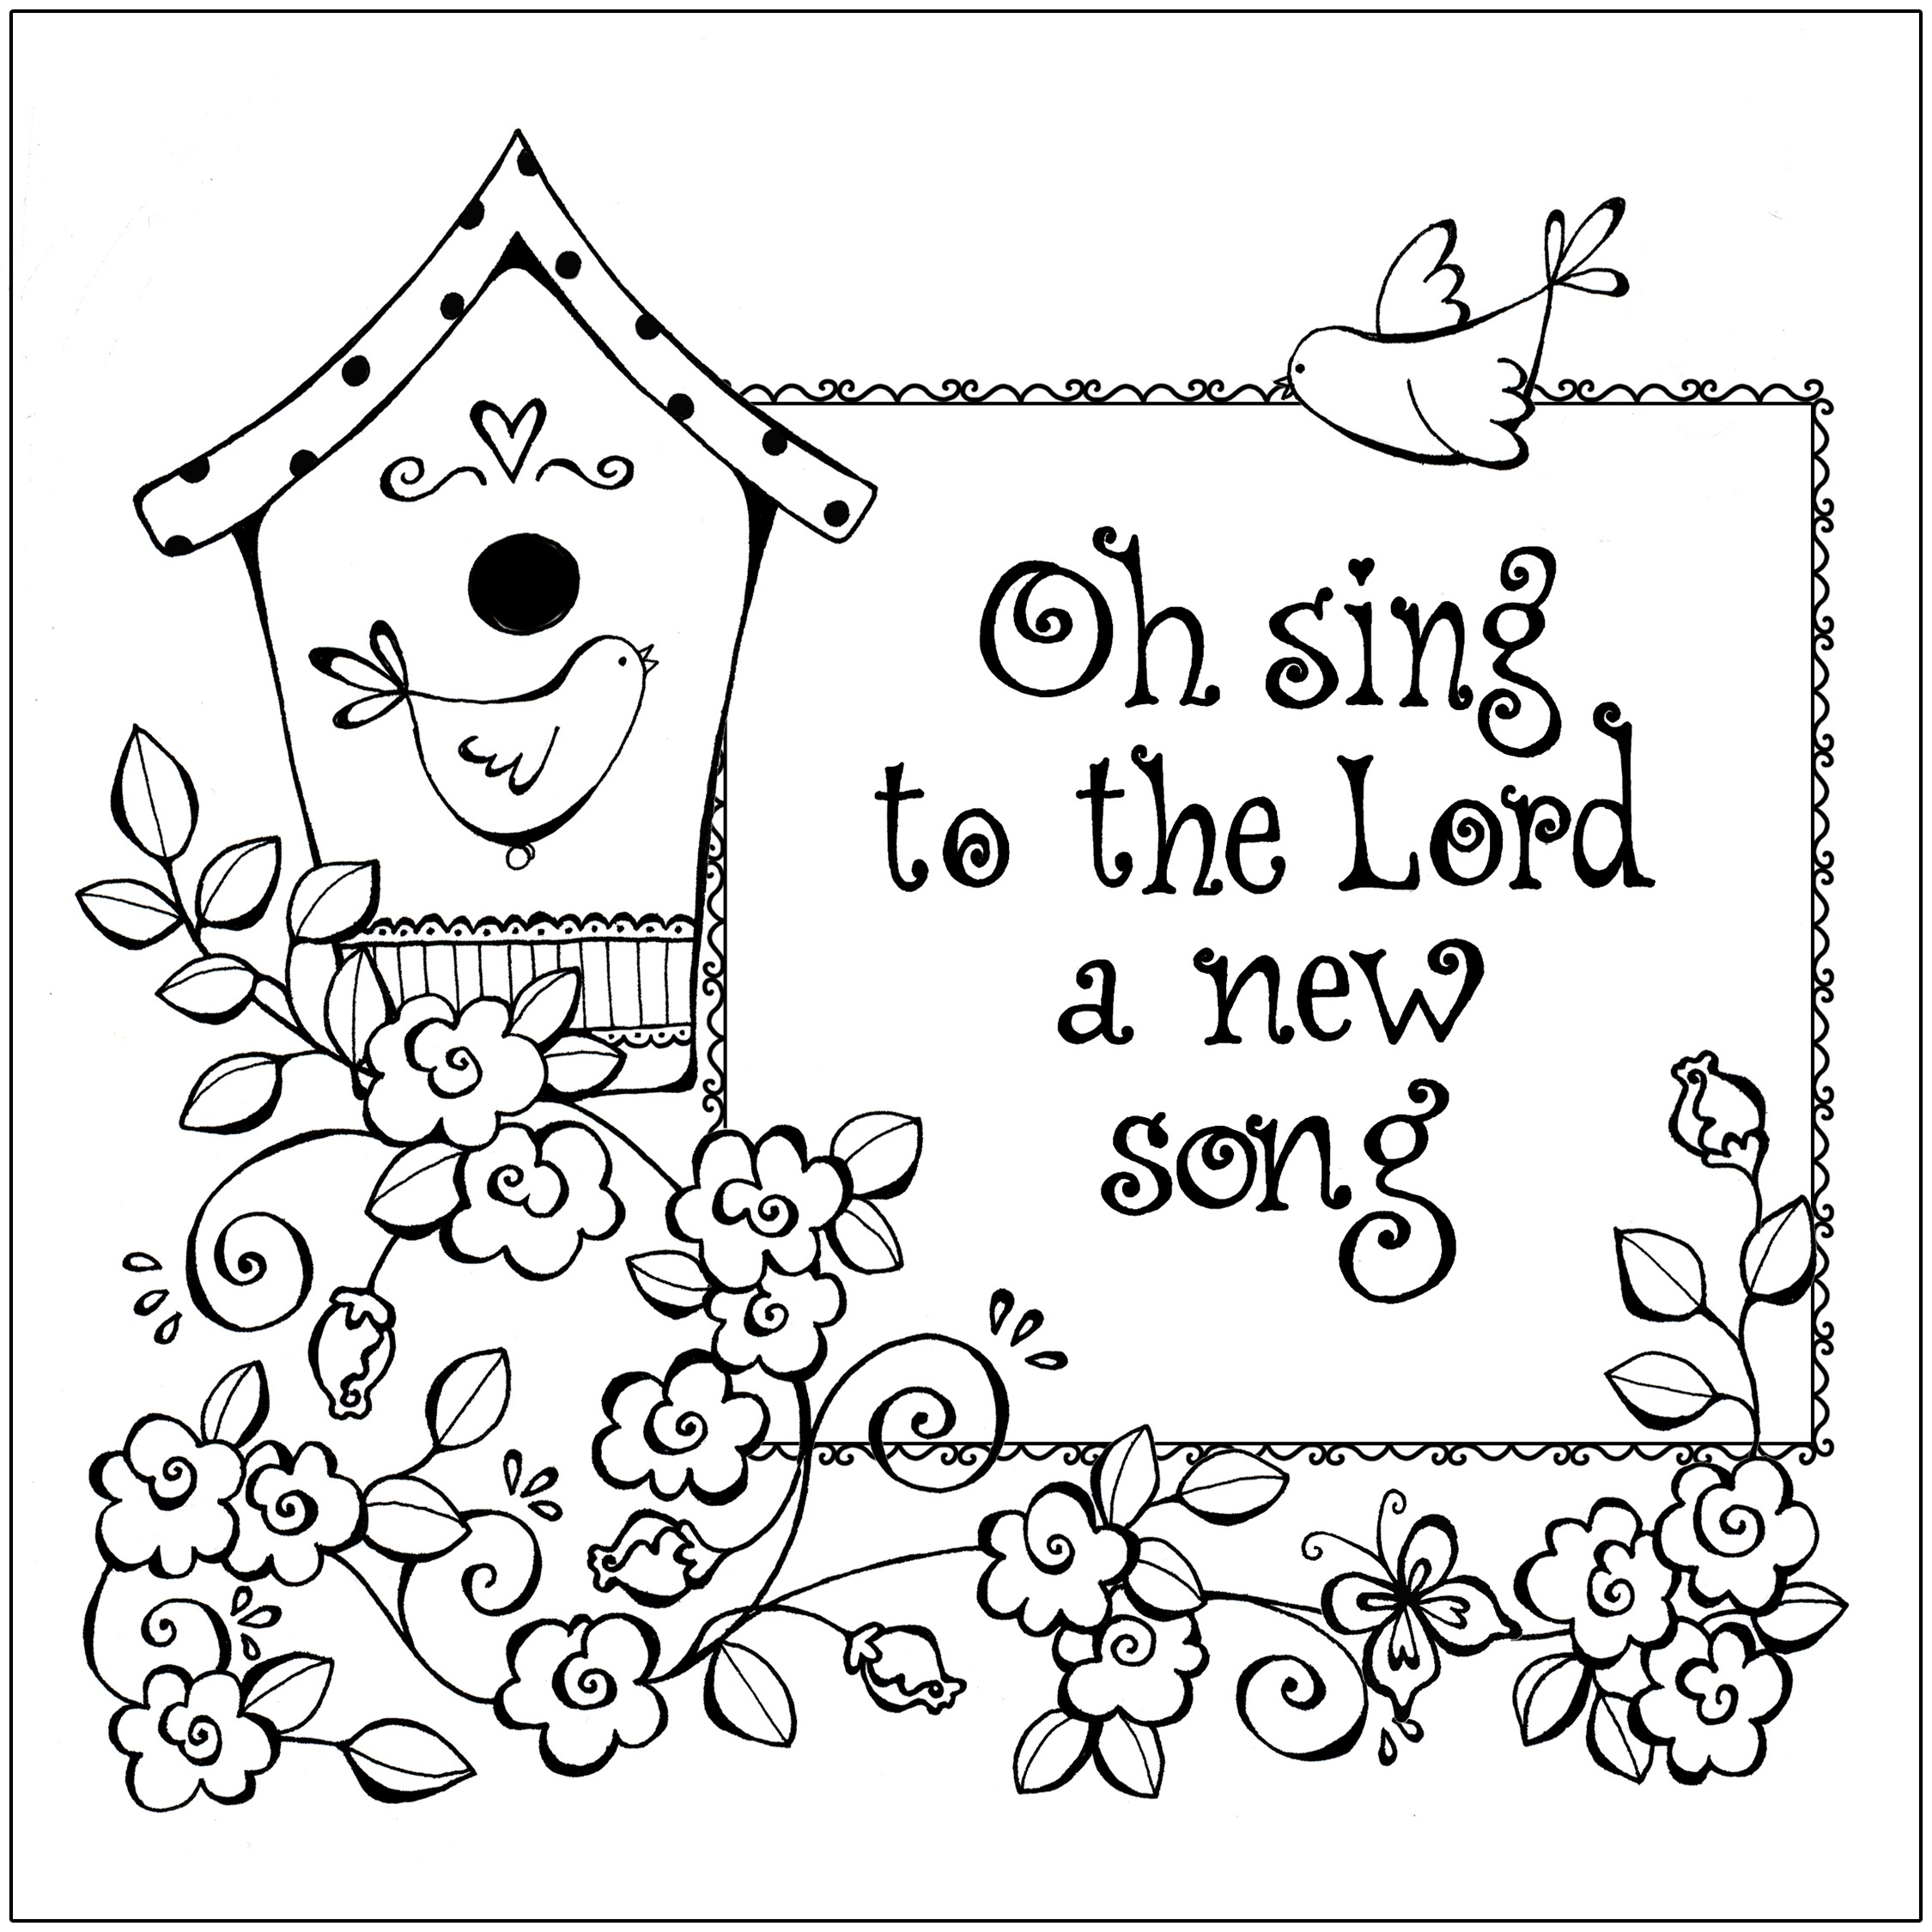 Free Printable Christian Coloring Pages For Kids - Best Coloring - Free Printable Sunday School Coloring Pages